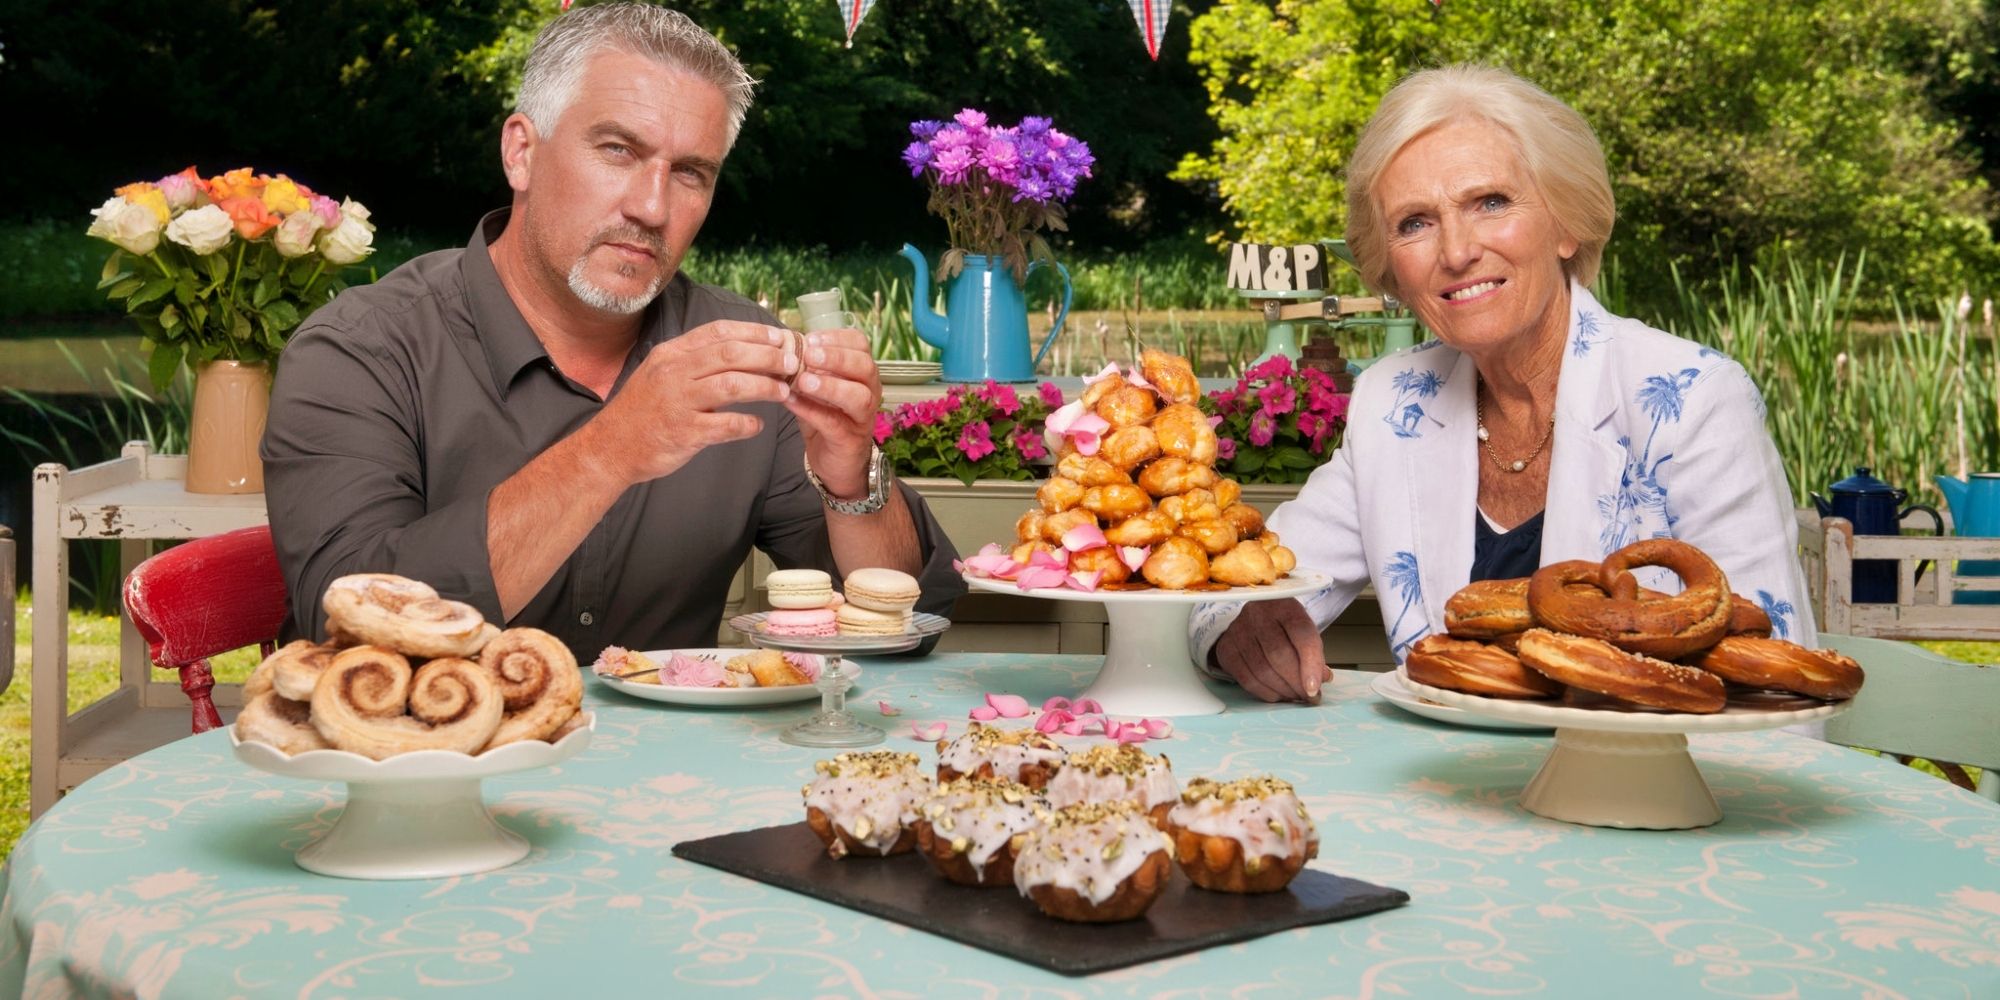 Mary Berry and Paul Hollywood sat at a table with cakes in GBBO